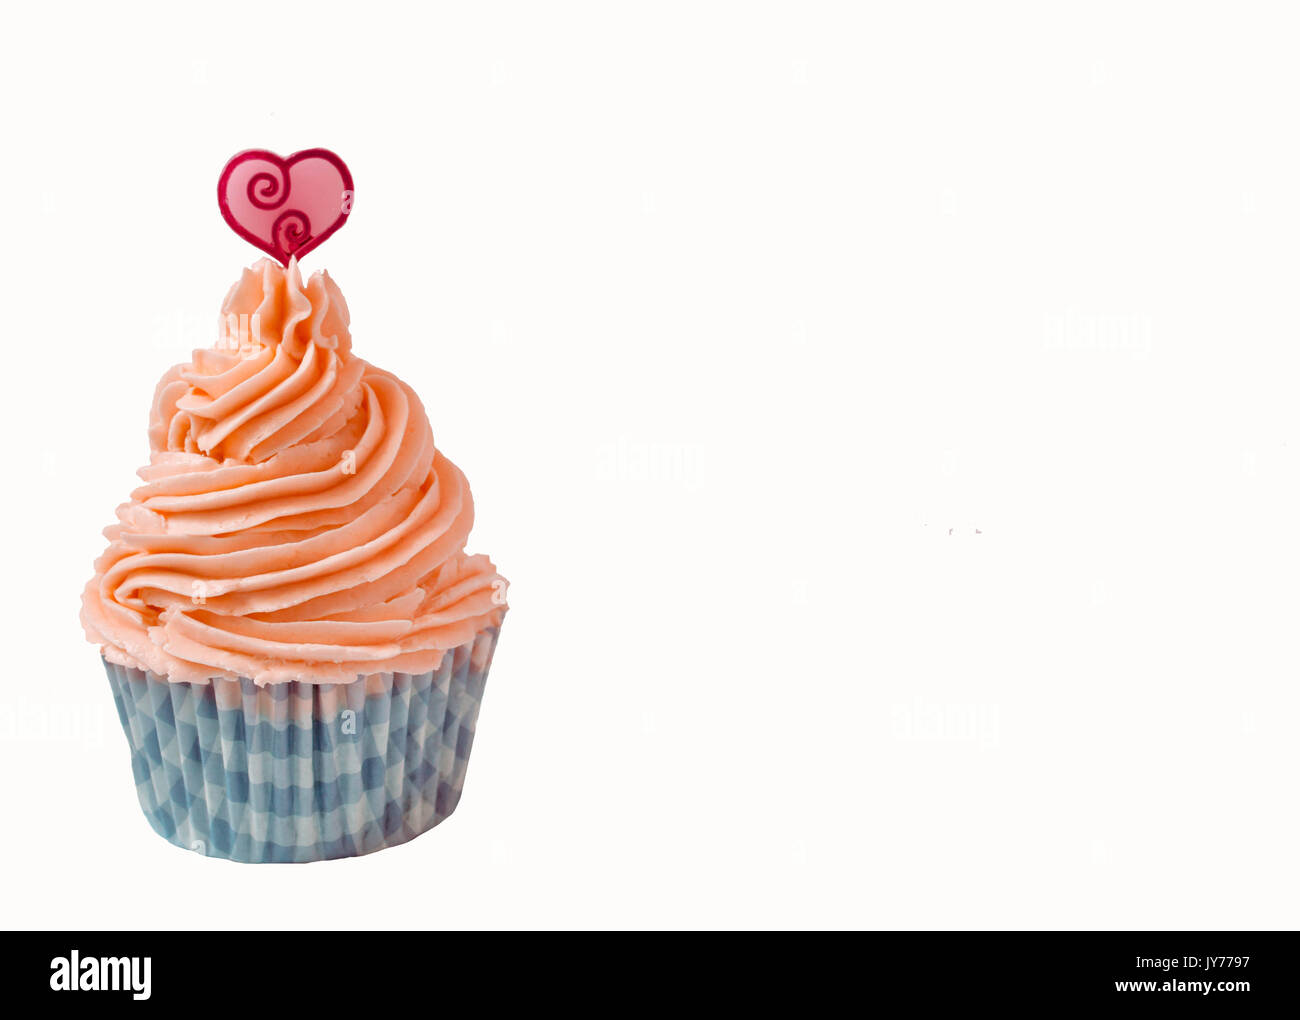 strawberry buttercream cupcake with a heart on top in white background Stock Photo